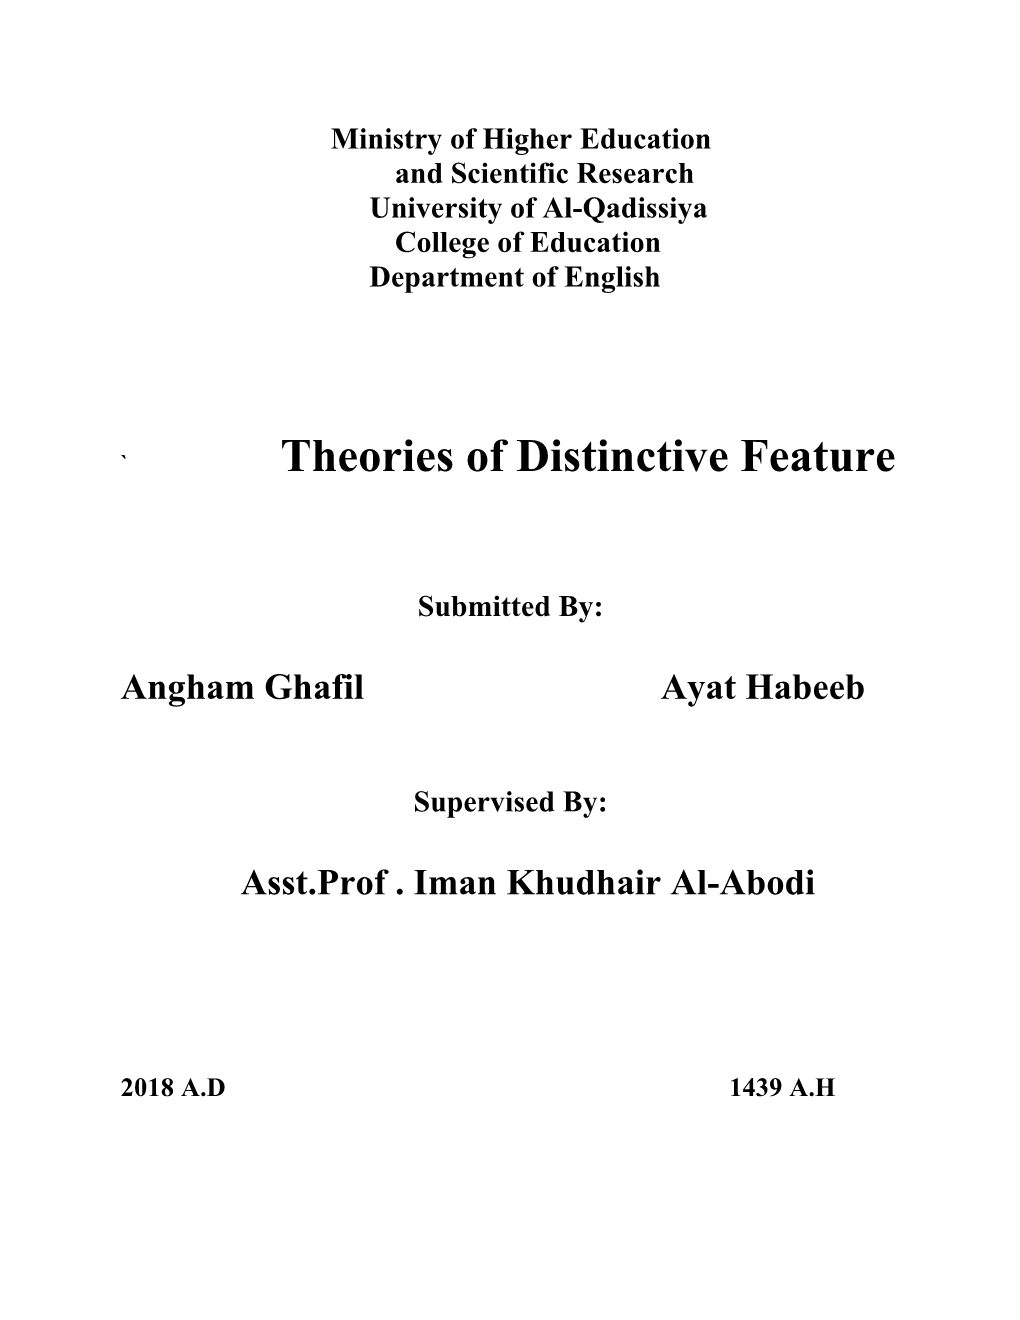 Theories of Distinctive Feature